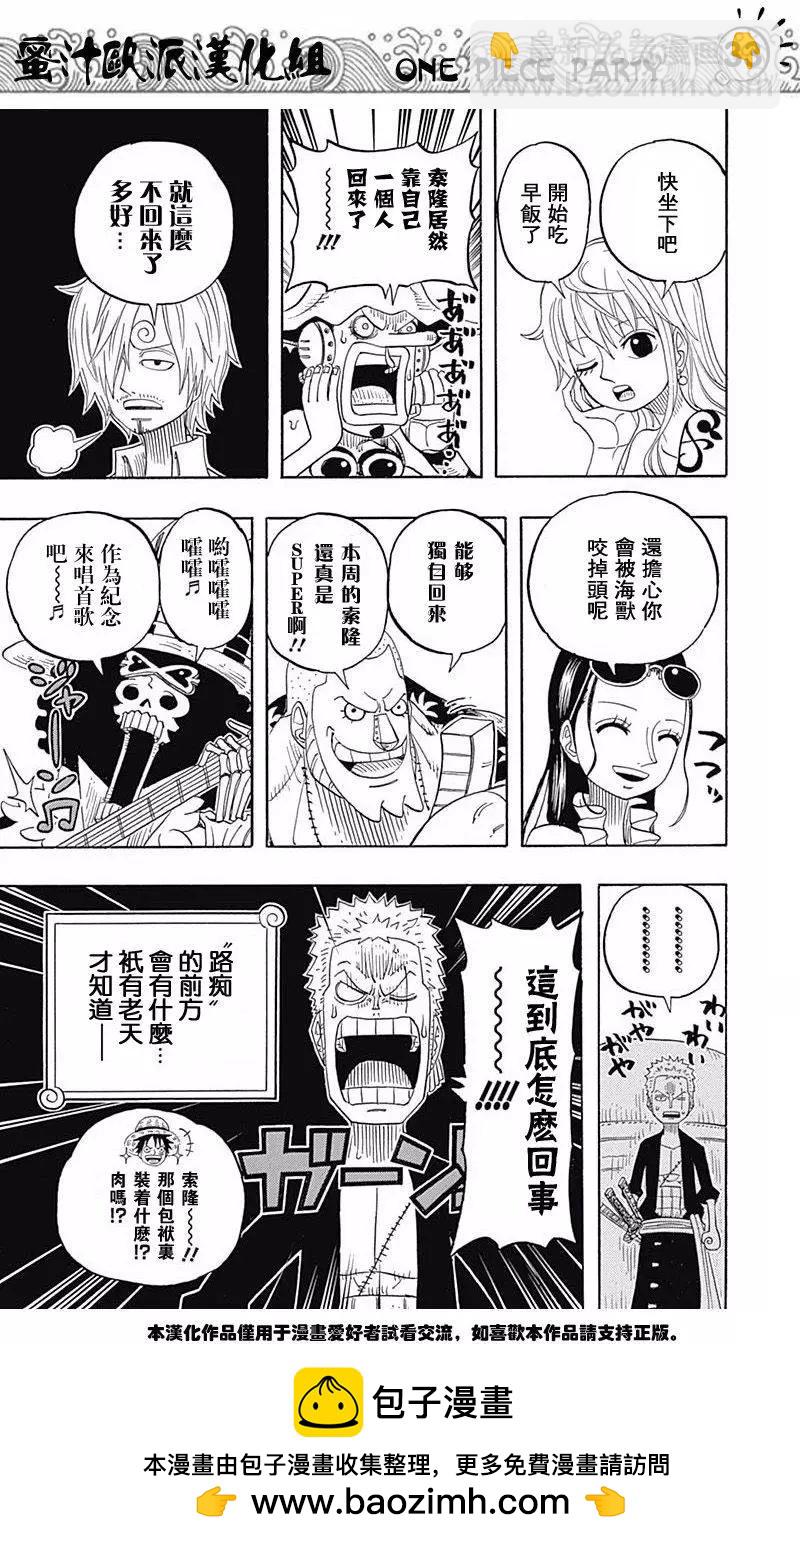 One piece party - 第07回 - 5